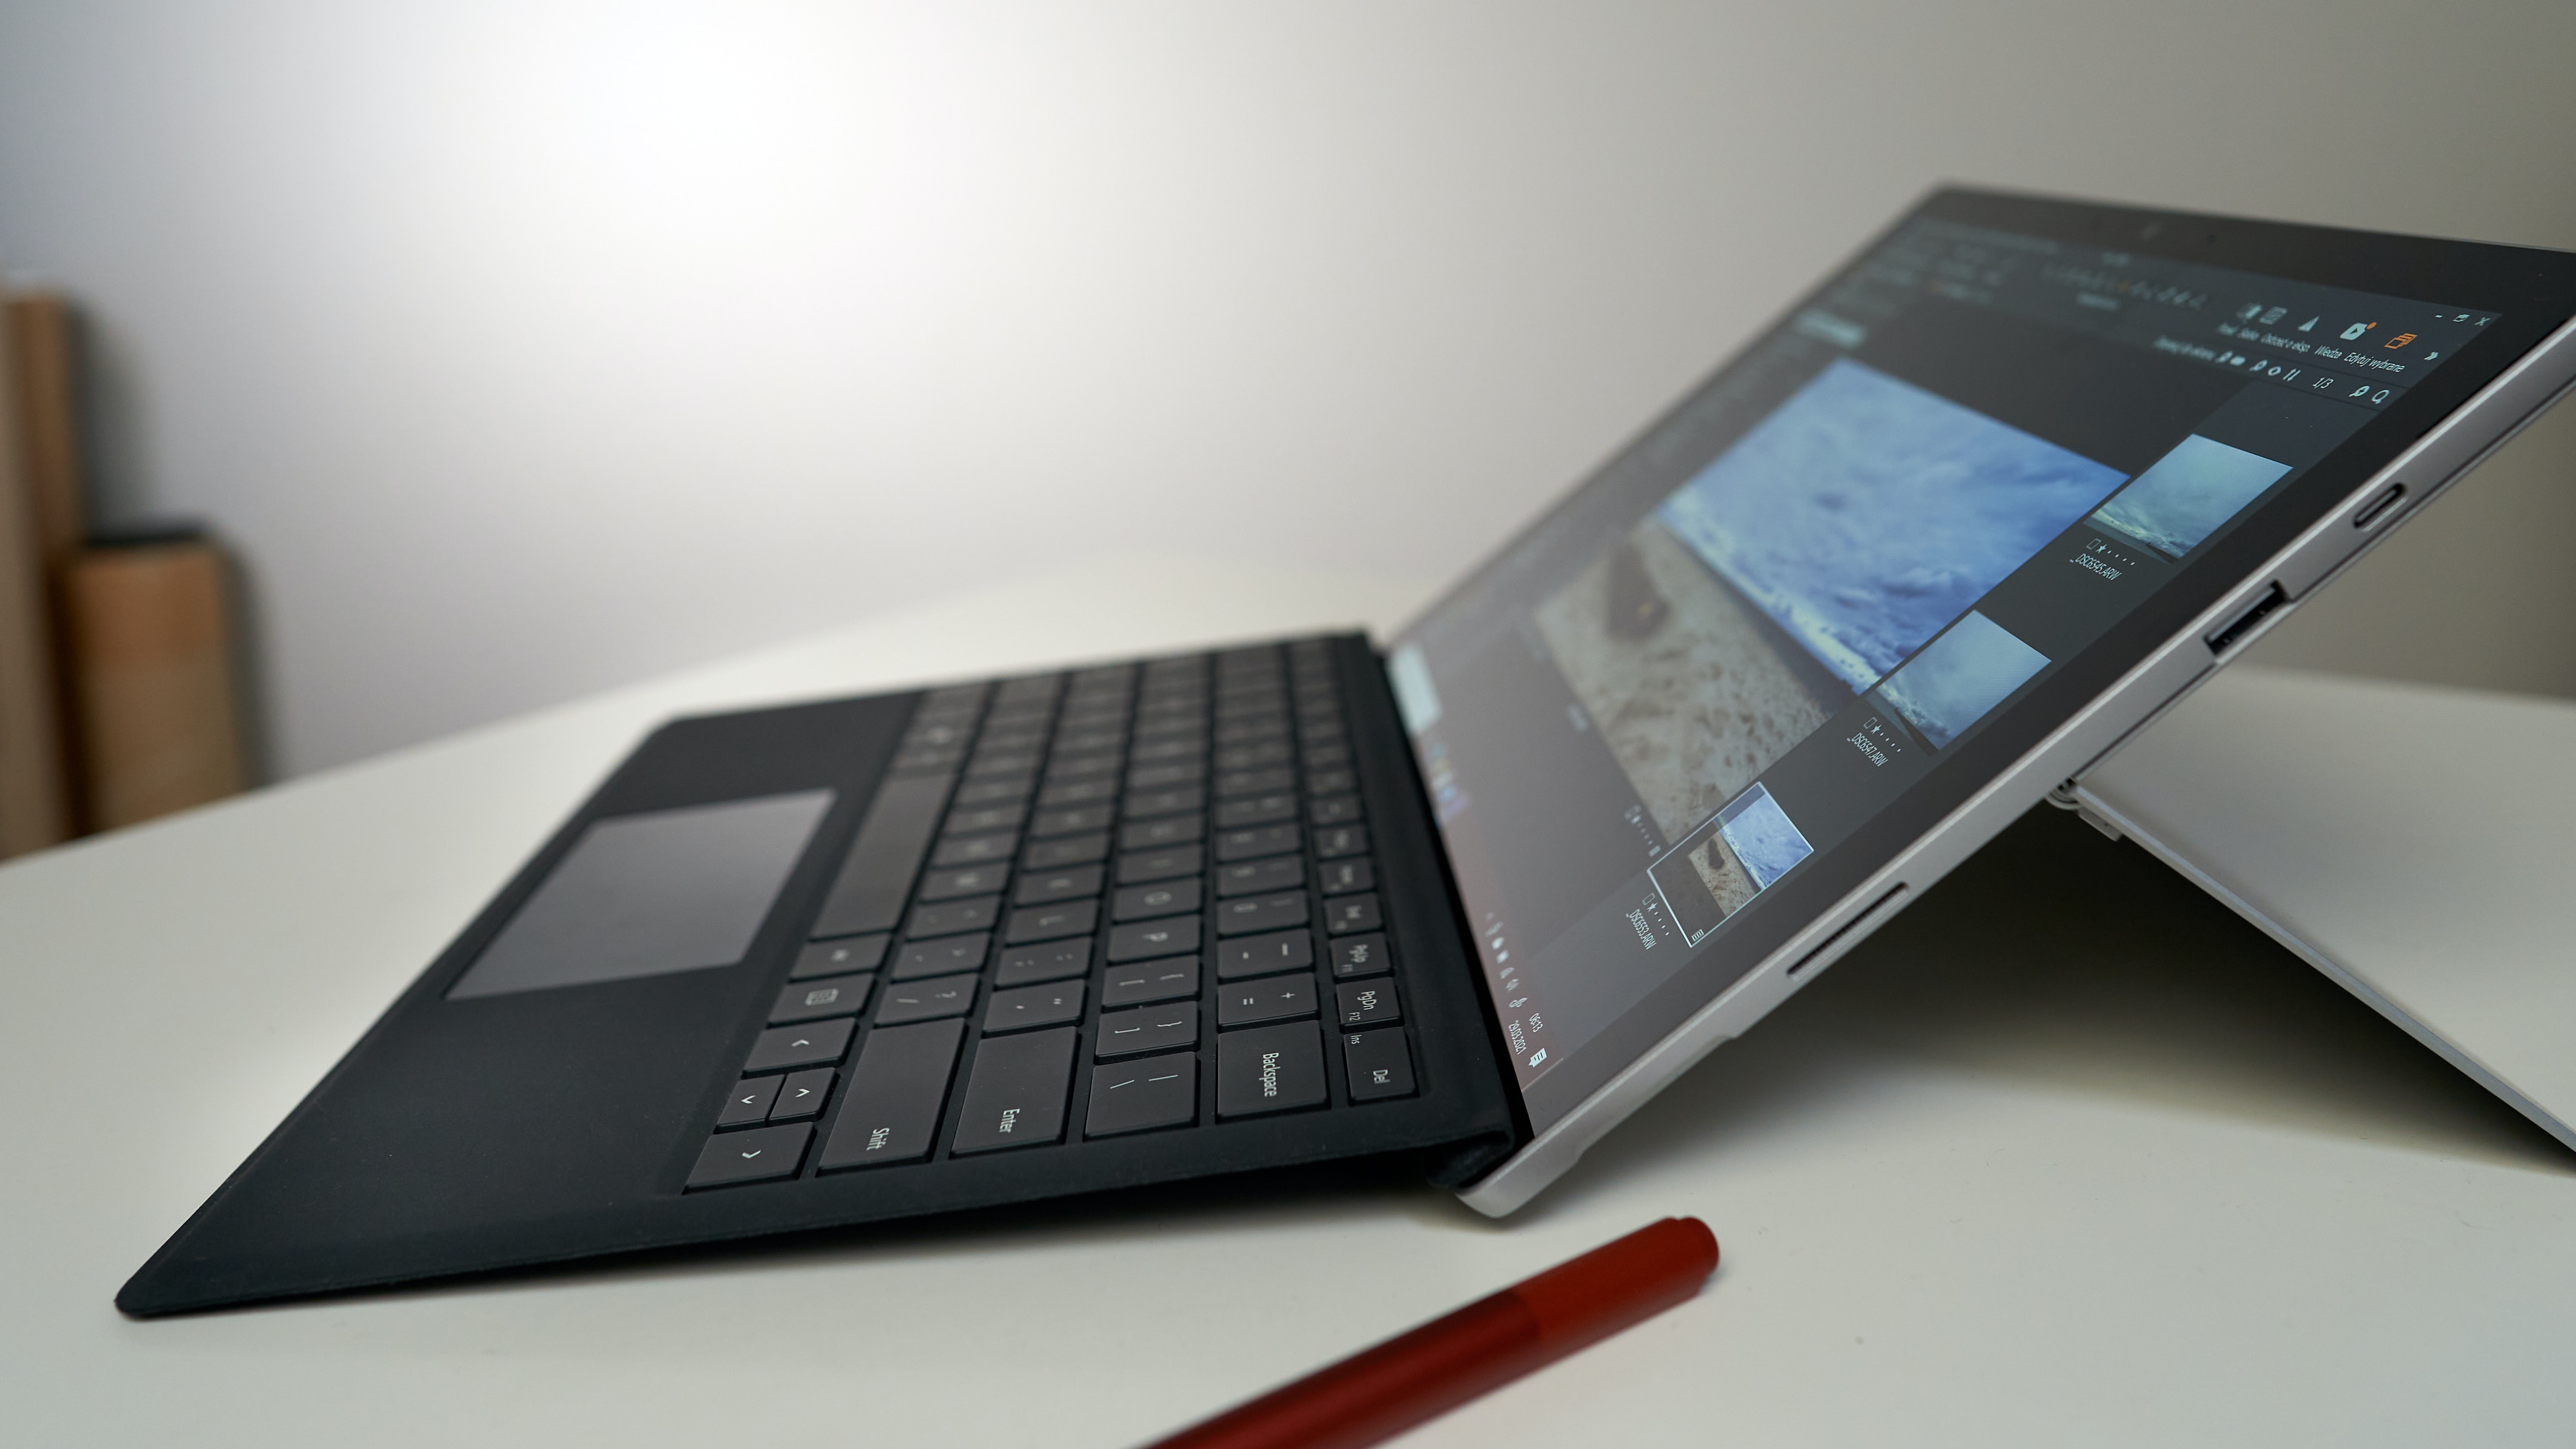 How To Download Apps On A Surface Pro